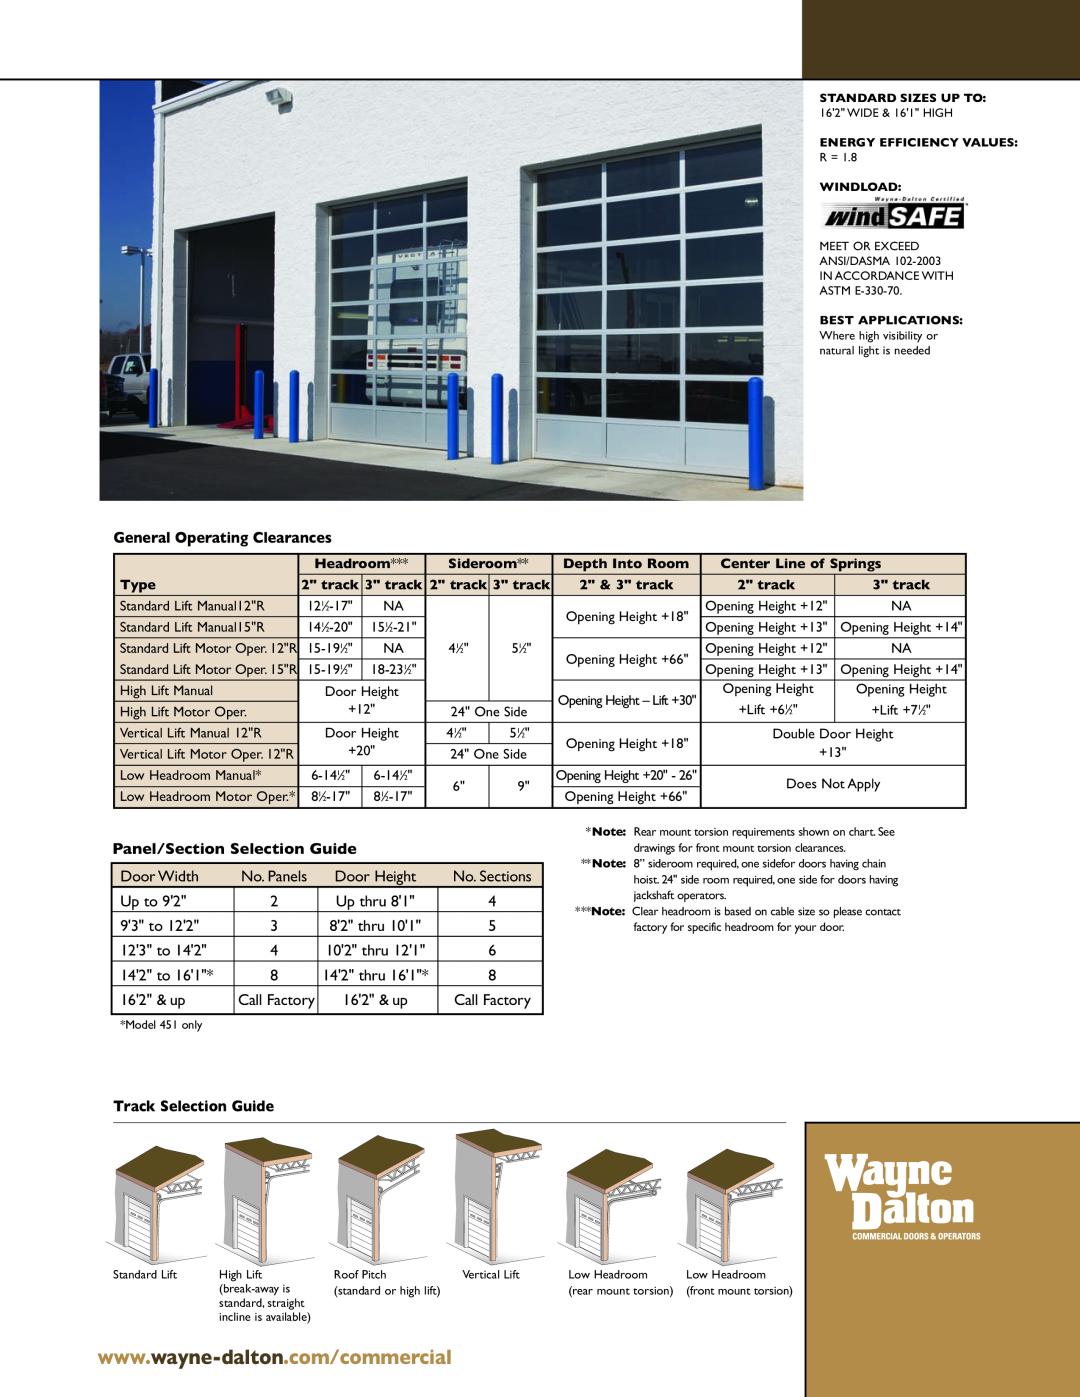 Wayne-Dalton 452 General Operating Clearances, Panel/Section Selection Guide, Door Width, Up to, 93 to, 123 to, 142 to 